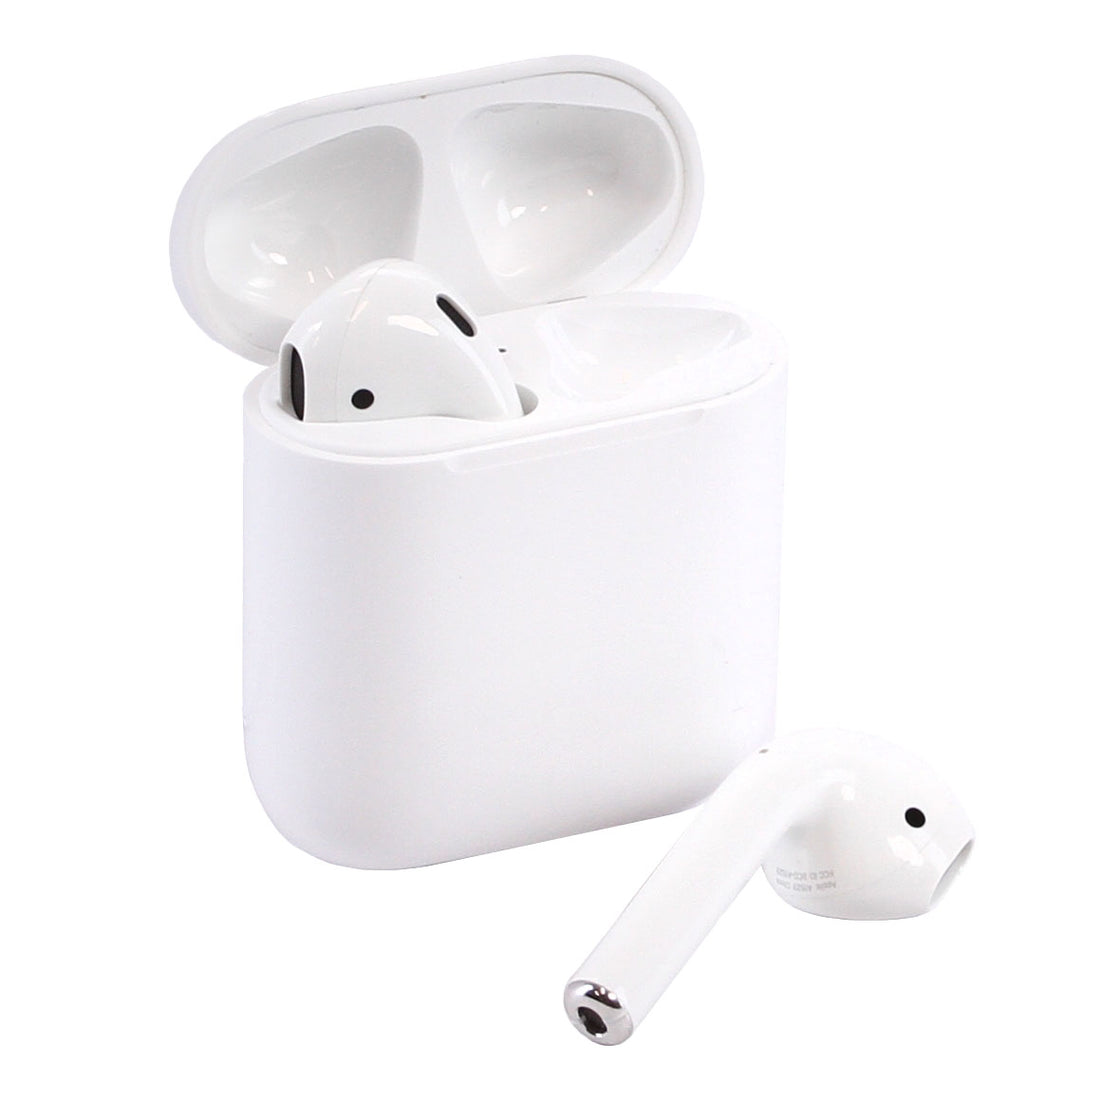 Apple AirPods Bluetooth Wireless Earphones w/ MFI Cable - White (Refurbished)